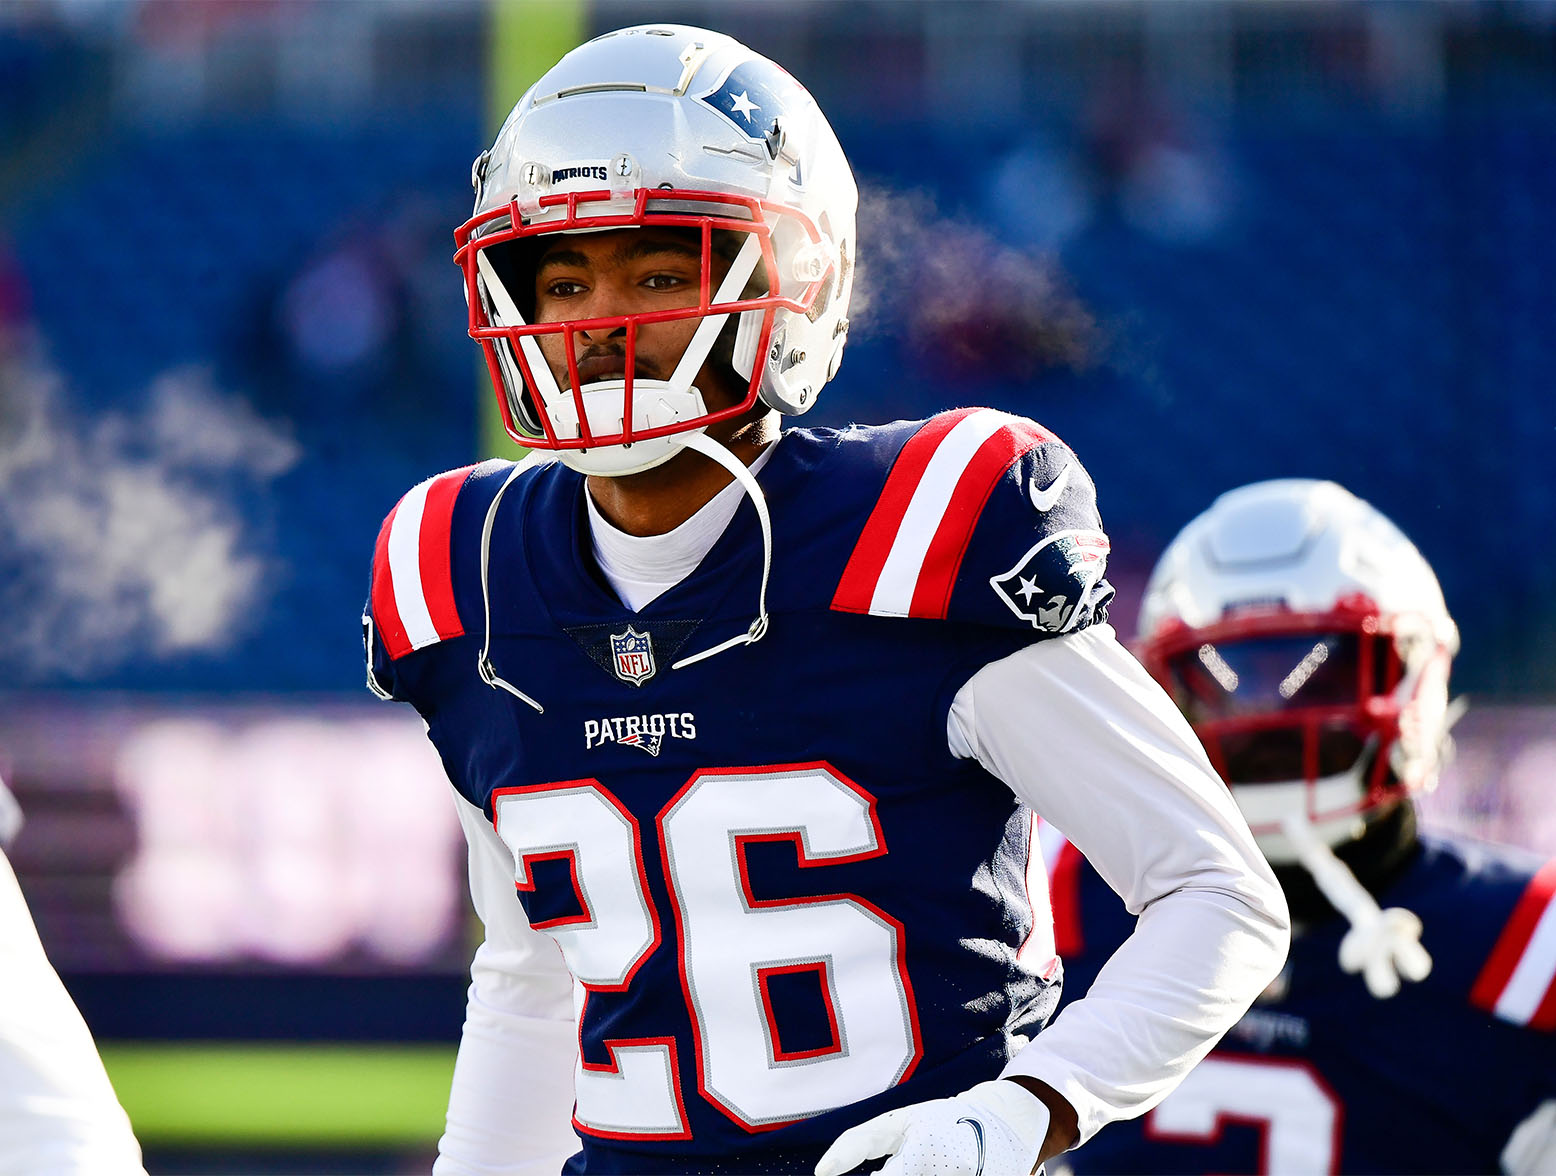 Dec 24, 2022; Foxborough, Massachusetts, USA; New England Patriots cornerback Shaun Wade (26) warms up before the start of a game against the Cincinnati Bengals at Gillette Stadium. Mandatory Credit: Eric Canha-USA TODAY Sports